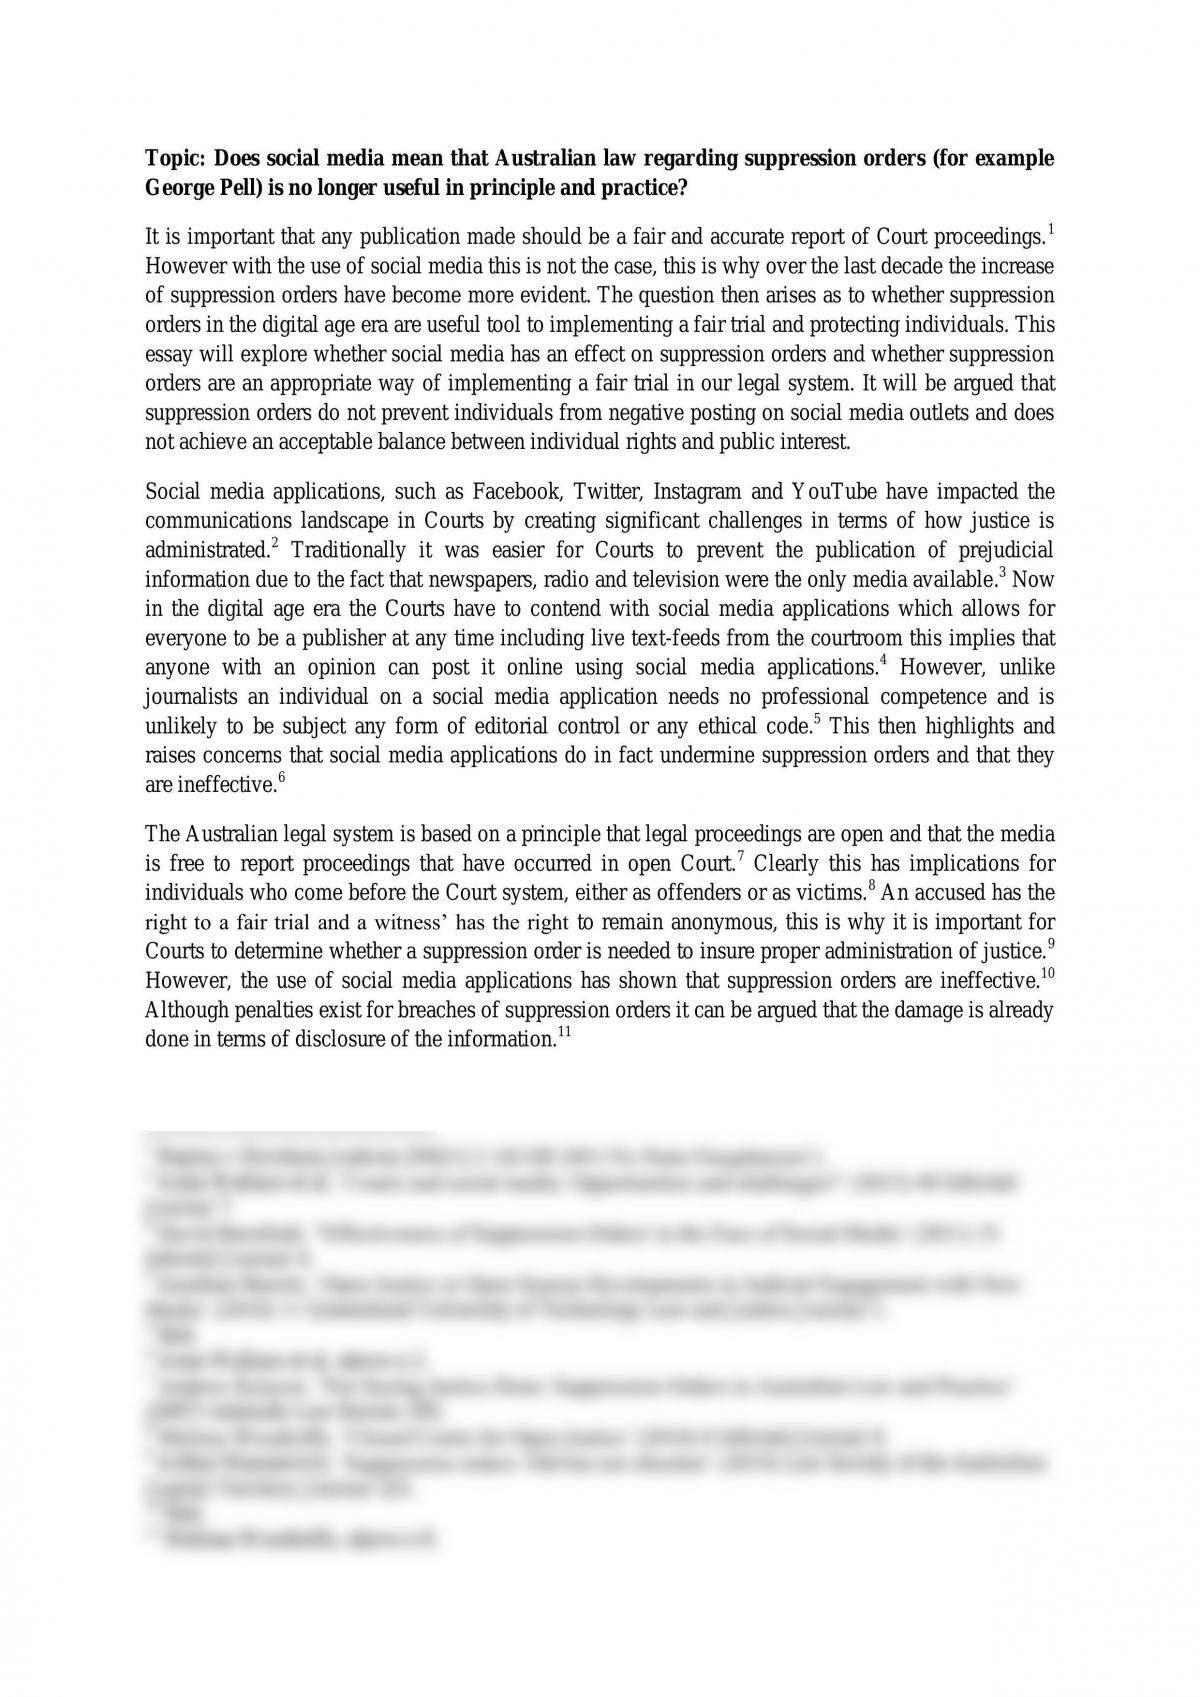 Essay on Suppression Orders - Page 1